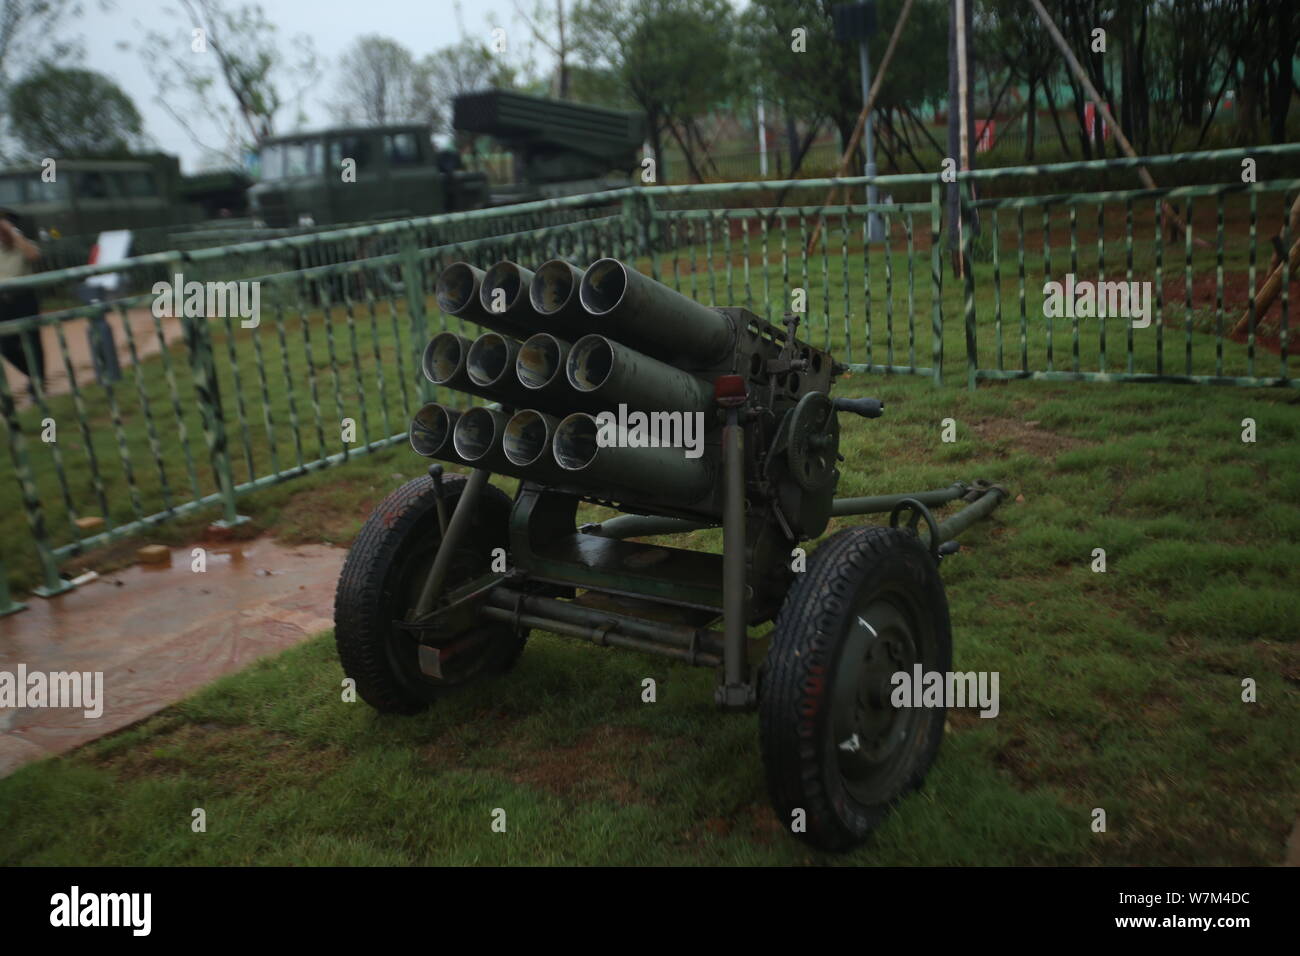 A Type 63 107mm multiple rocket launcher of Chinese PLA's (Peoples Liberation Army) Air Force is on display at a military theme park to mark the 90th Stock Photo